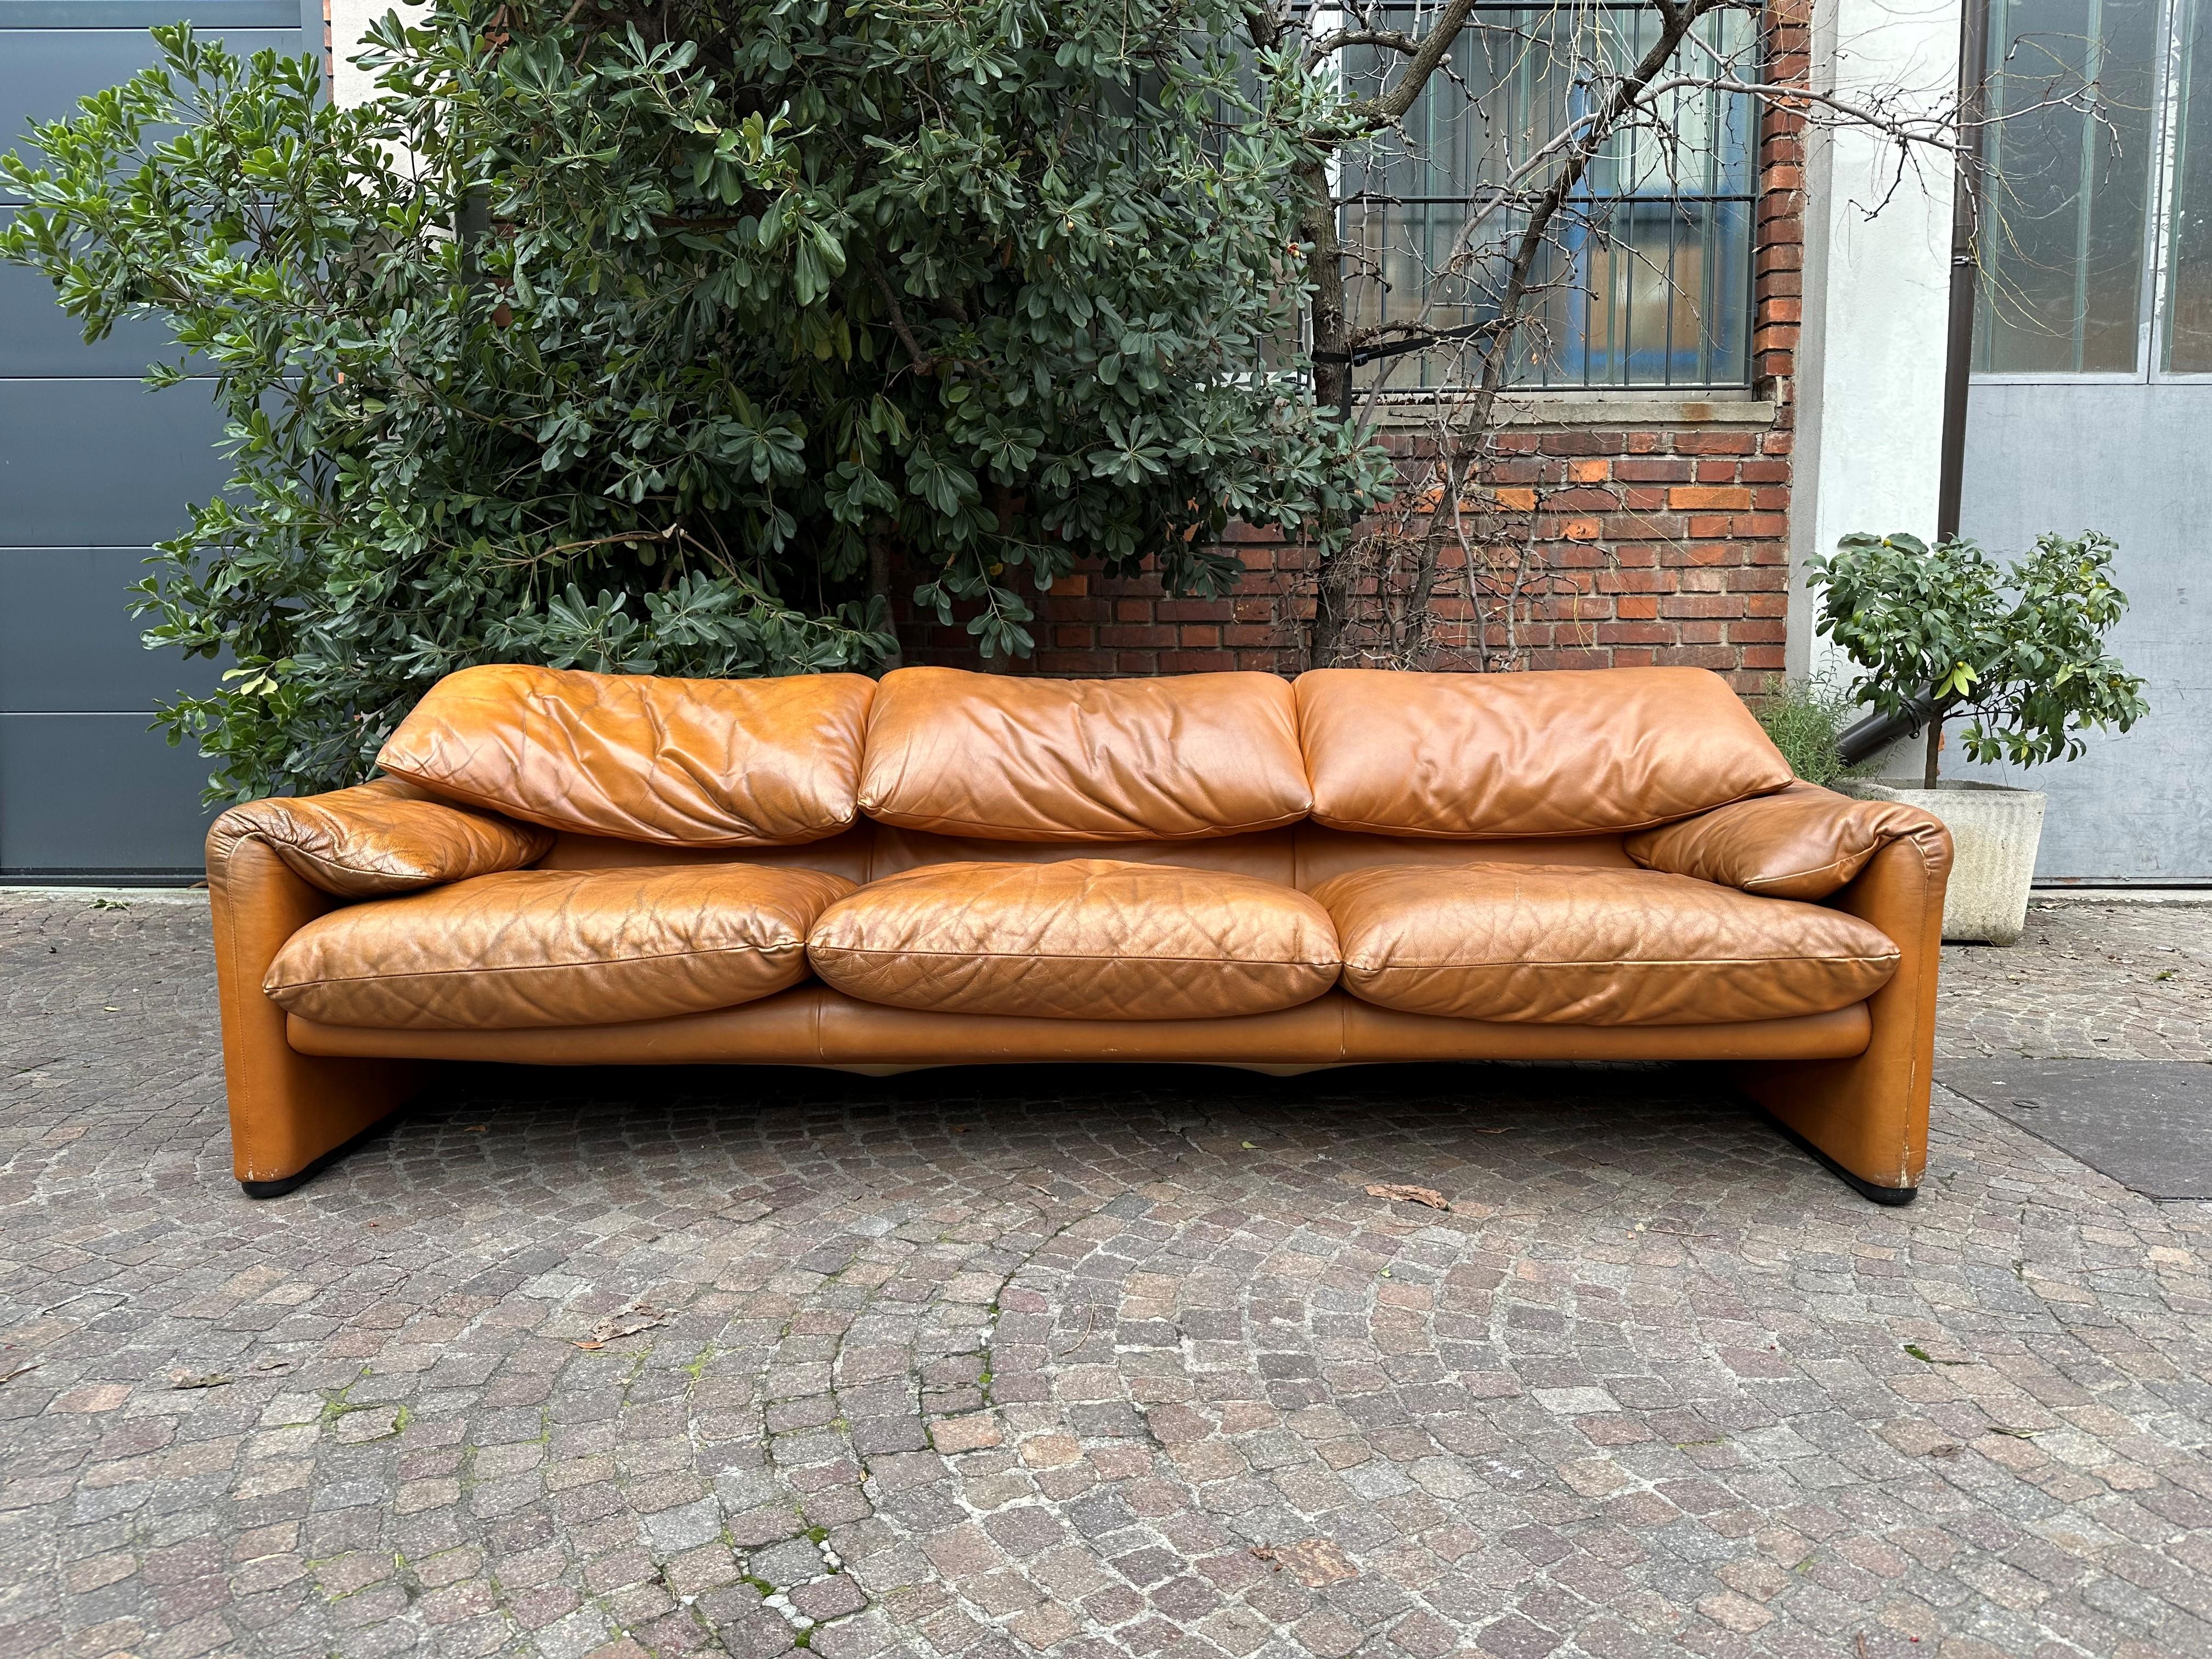 Vico Magistretti Maralunga Sofa,
Maralunga sofa, designed by Vico Magistretti for Cassina, Italian manufacture dating back to the seventies.
The three-seater sofa in buff-brown leather, it's characteristic for the movement of the backrests and